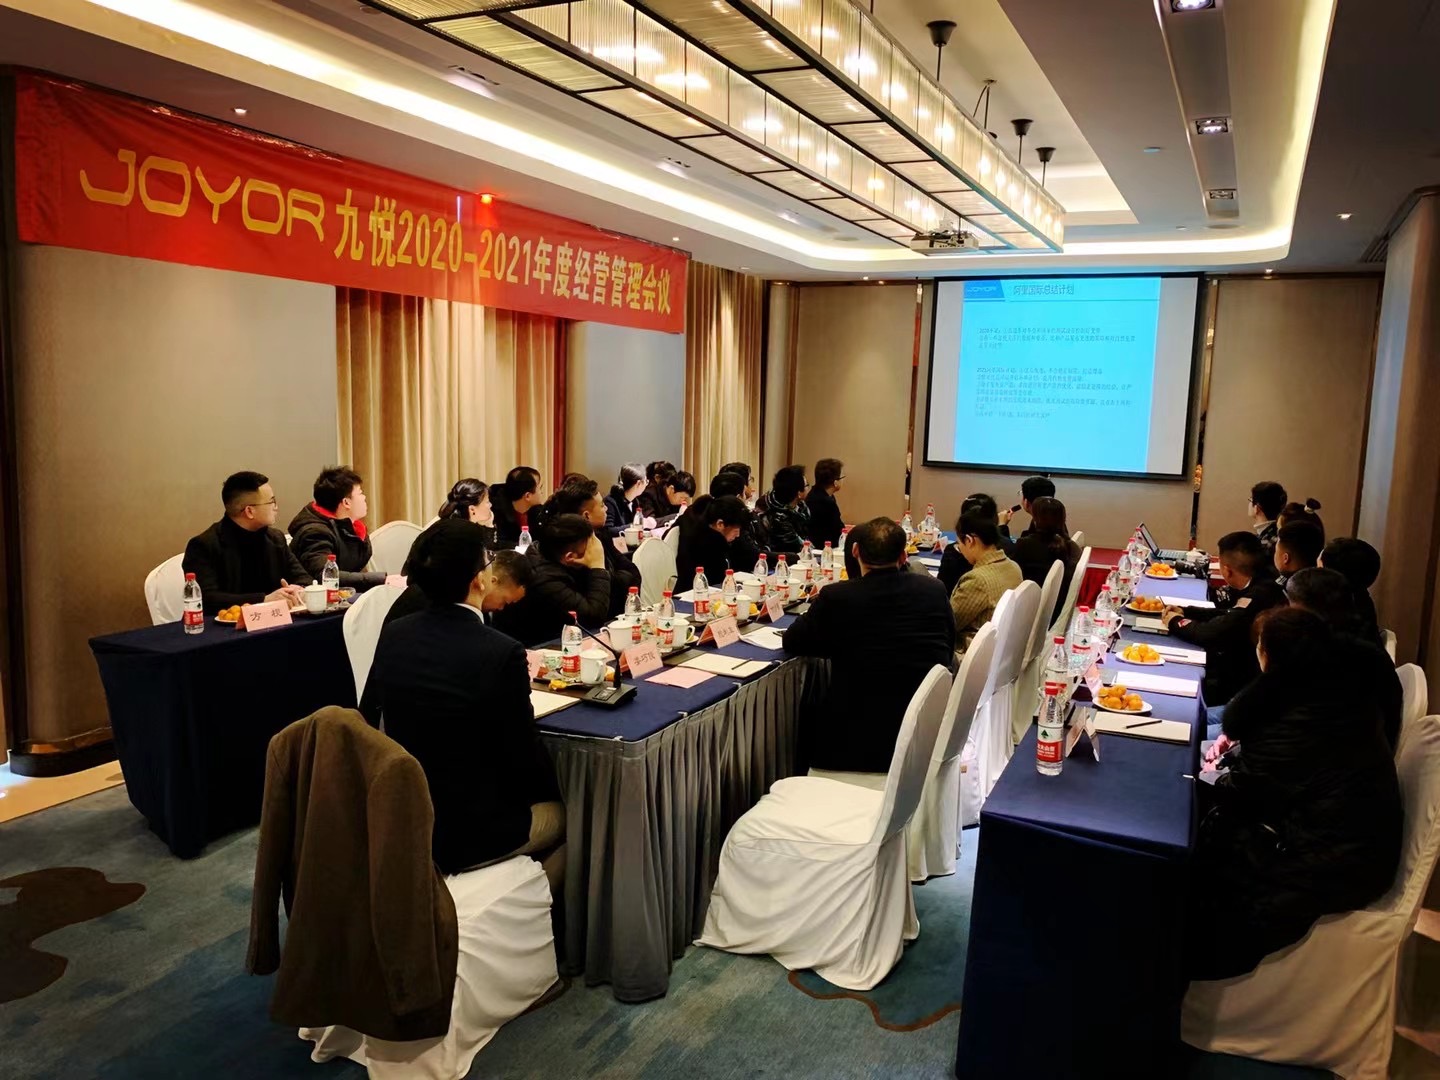 Joyor 2020-2021 Annual Working Conference held successfully